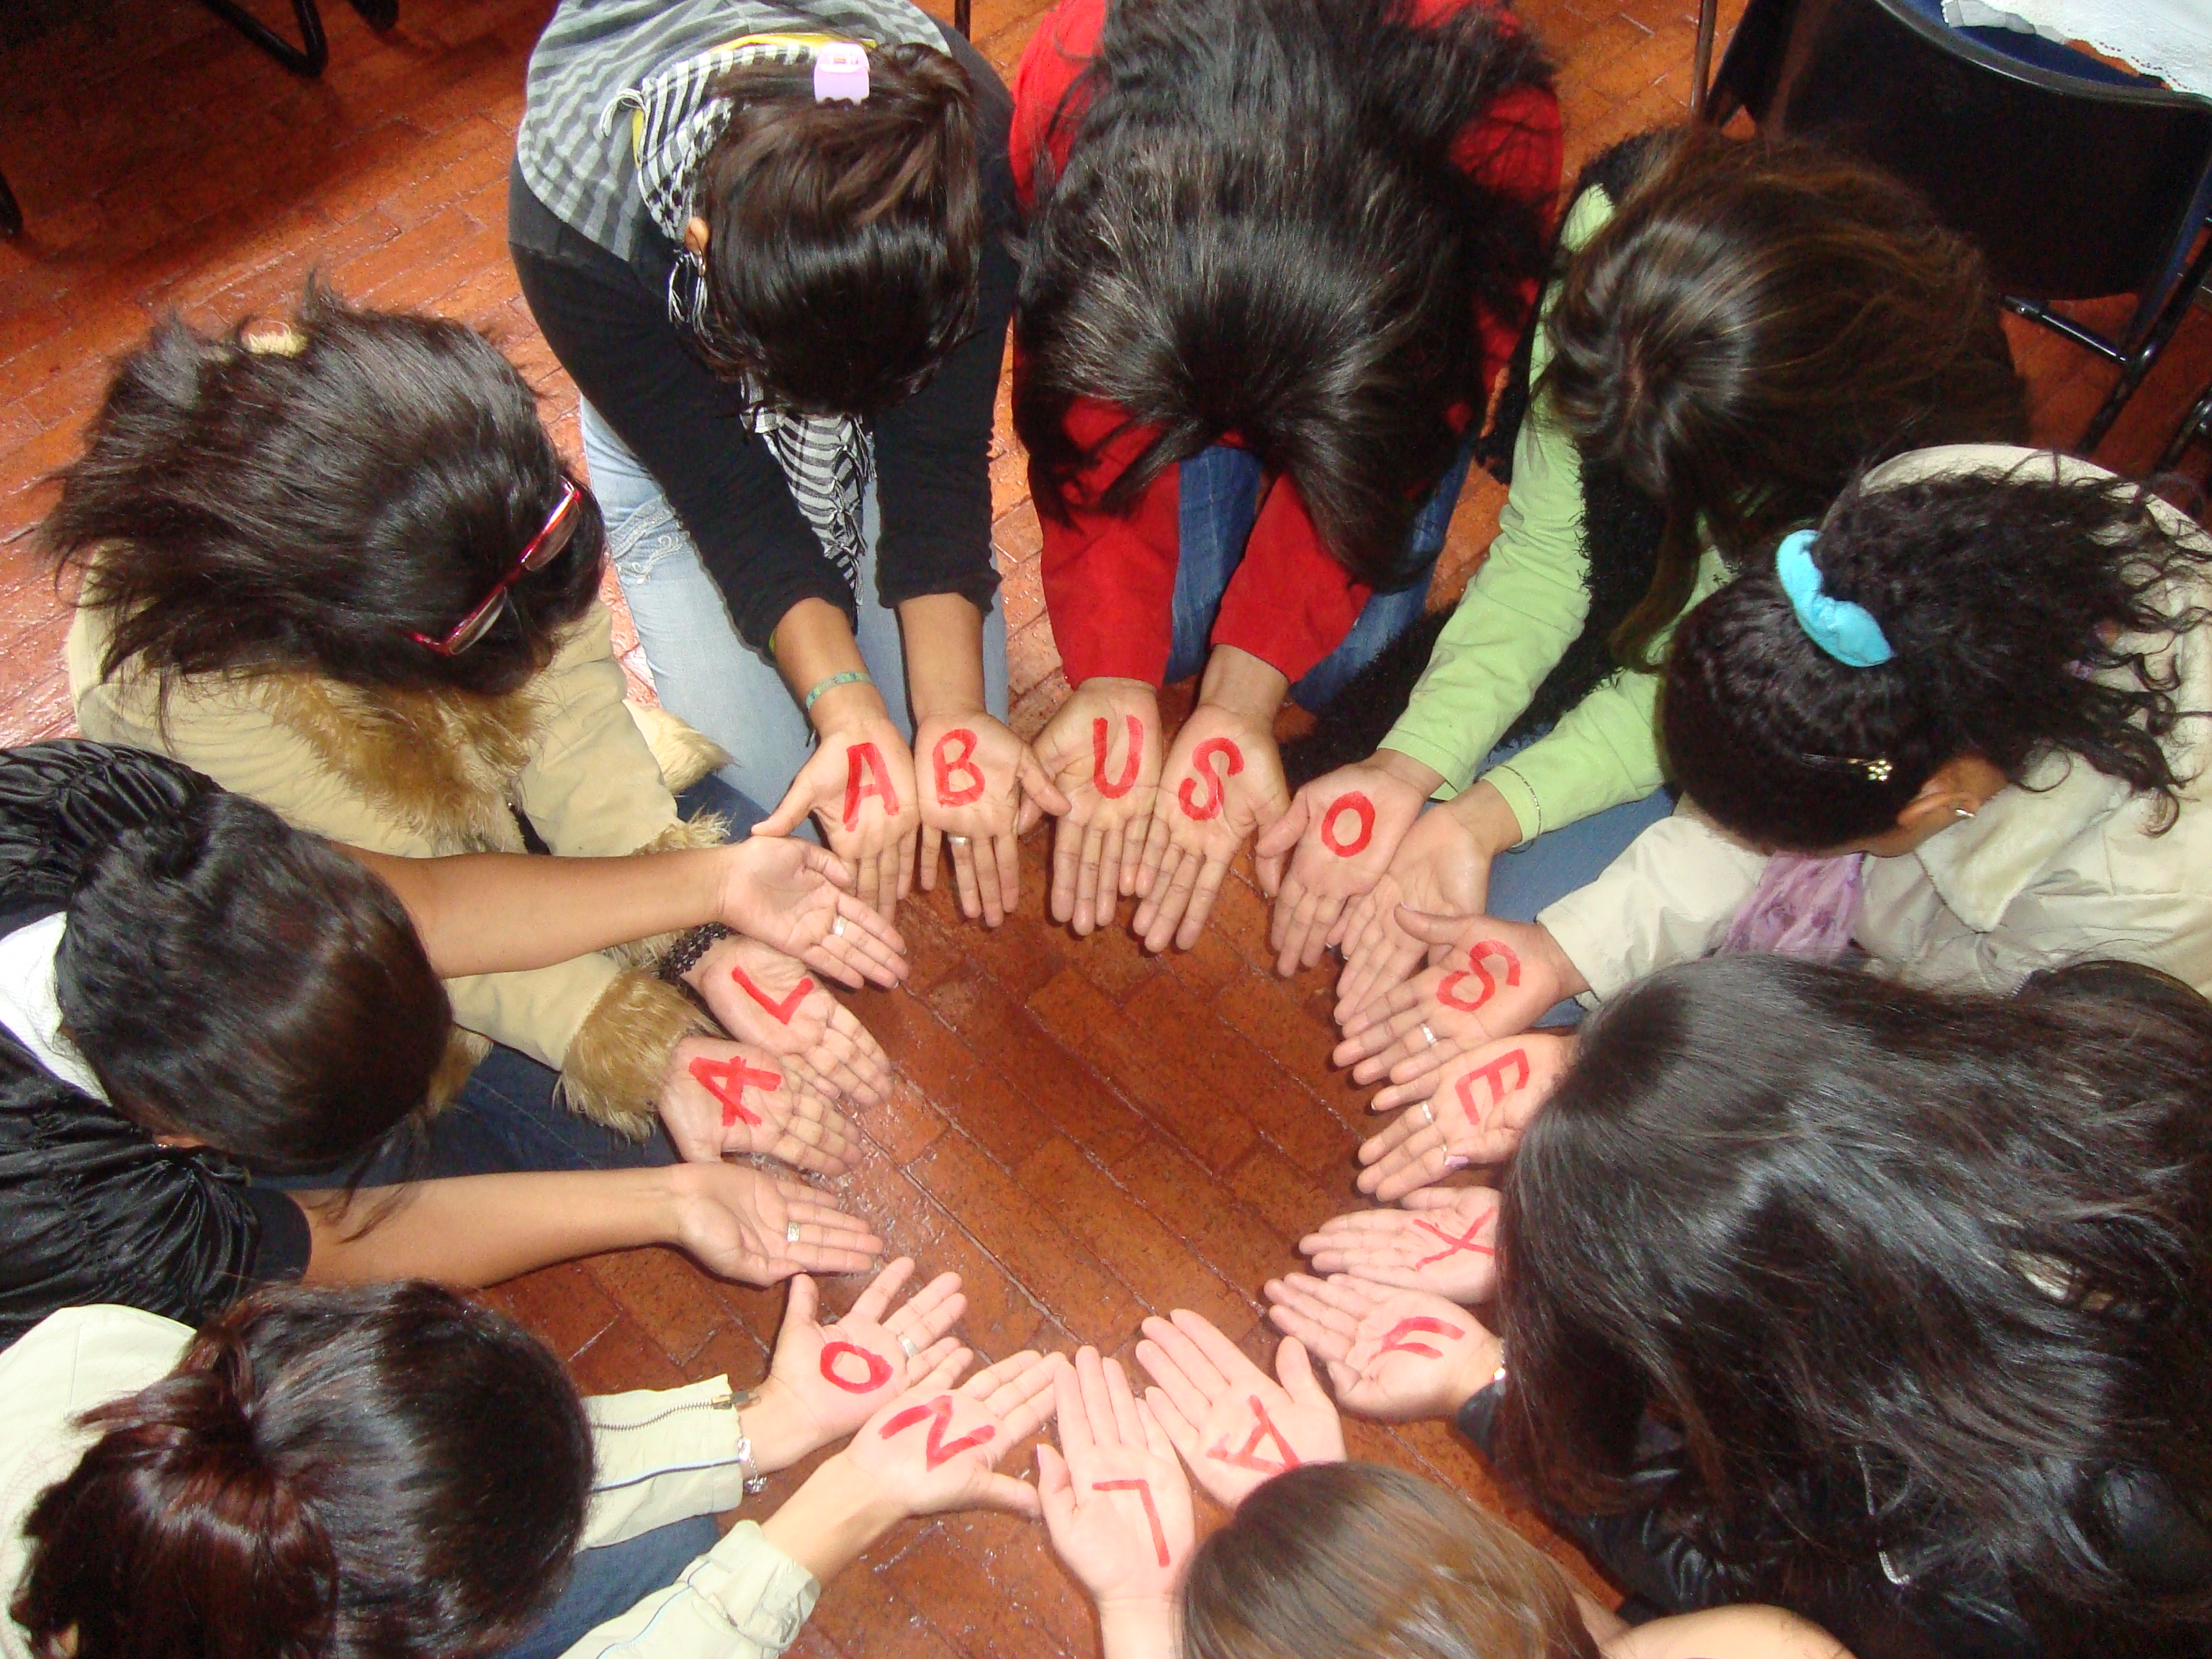 Members of a support group for survivors of sexual violence create a circle with their hands, Bogotá, Colombia, March 2011. The letters on the hands of the women in a circle form the words "No al abuso sexual" (No to sexual abuse). They are a group of women who have been victims of sexual violence in the armed conflict in Colombia who meet regularly.